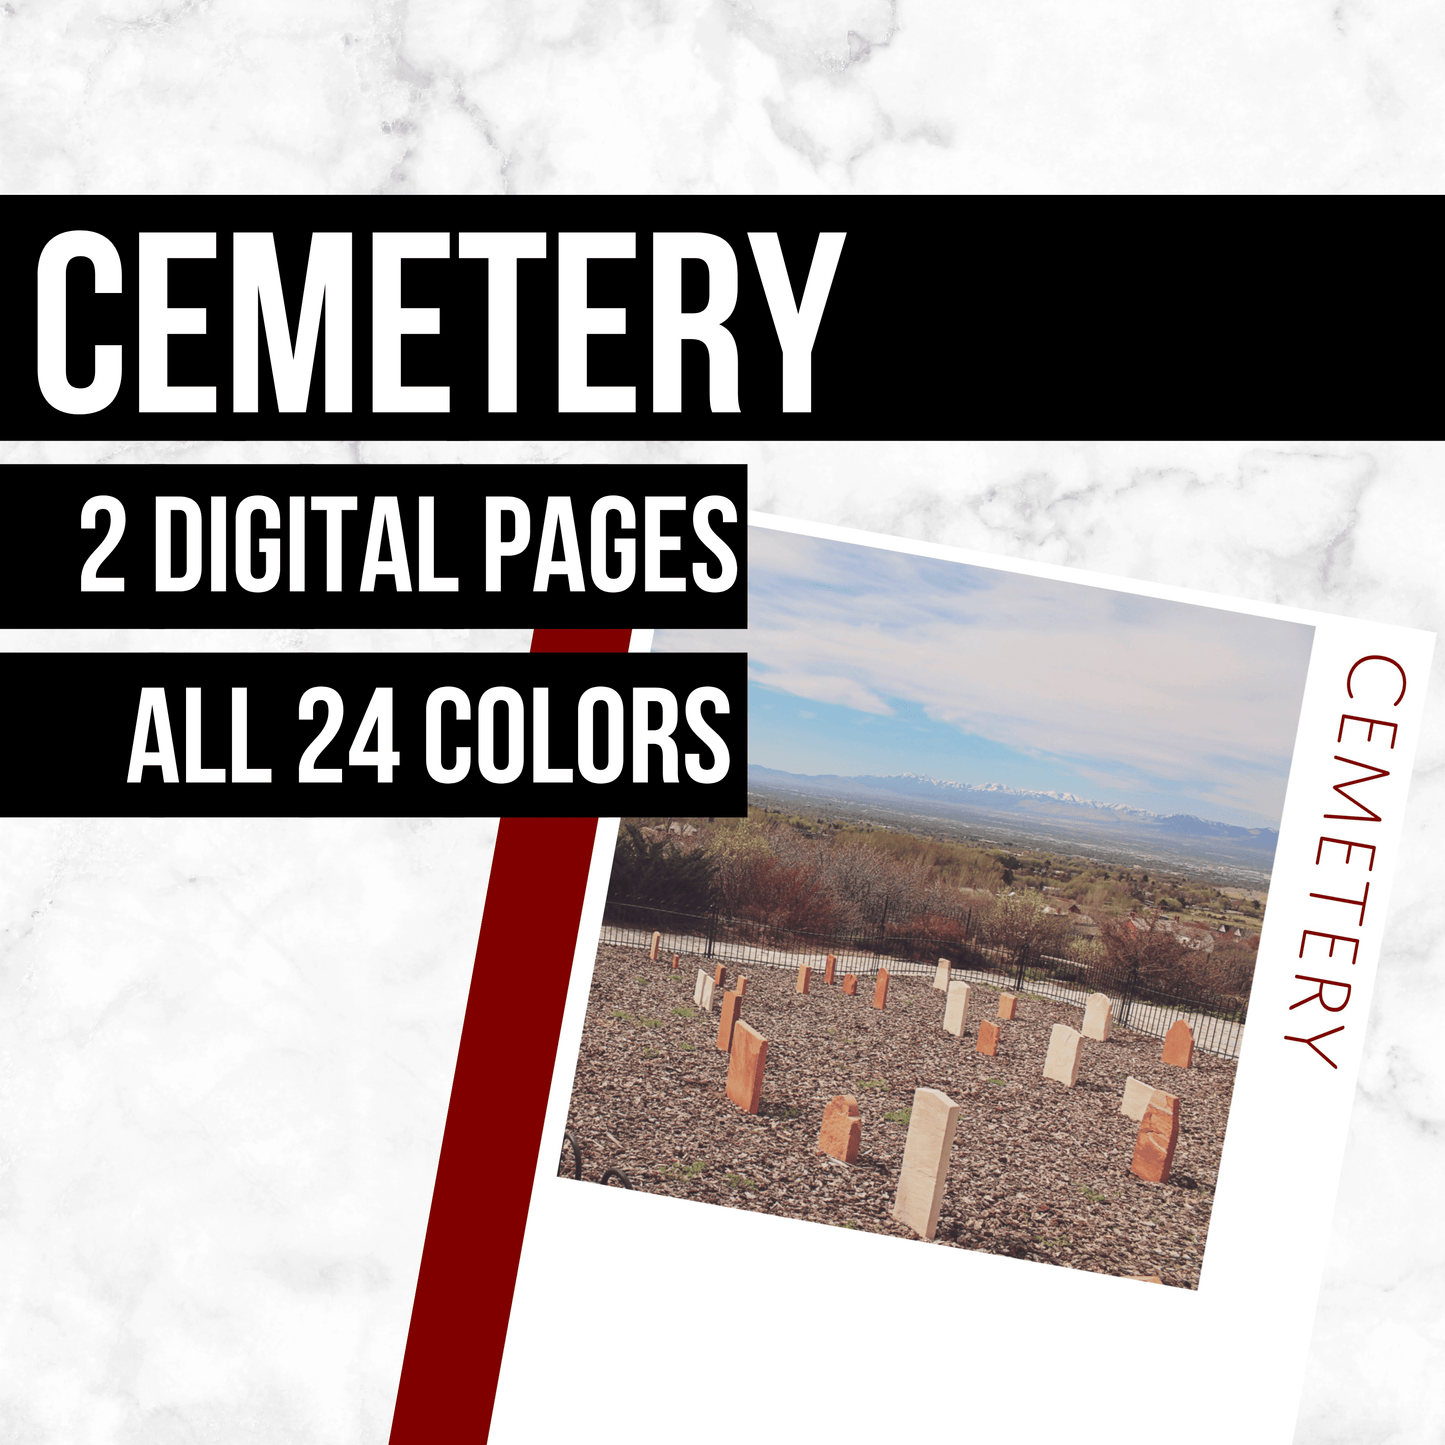 Cemetery Blank Page: Printable Genealogy Form (Digital Download)